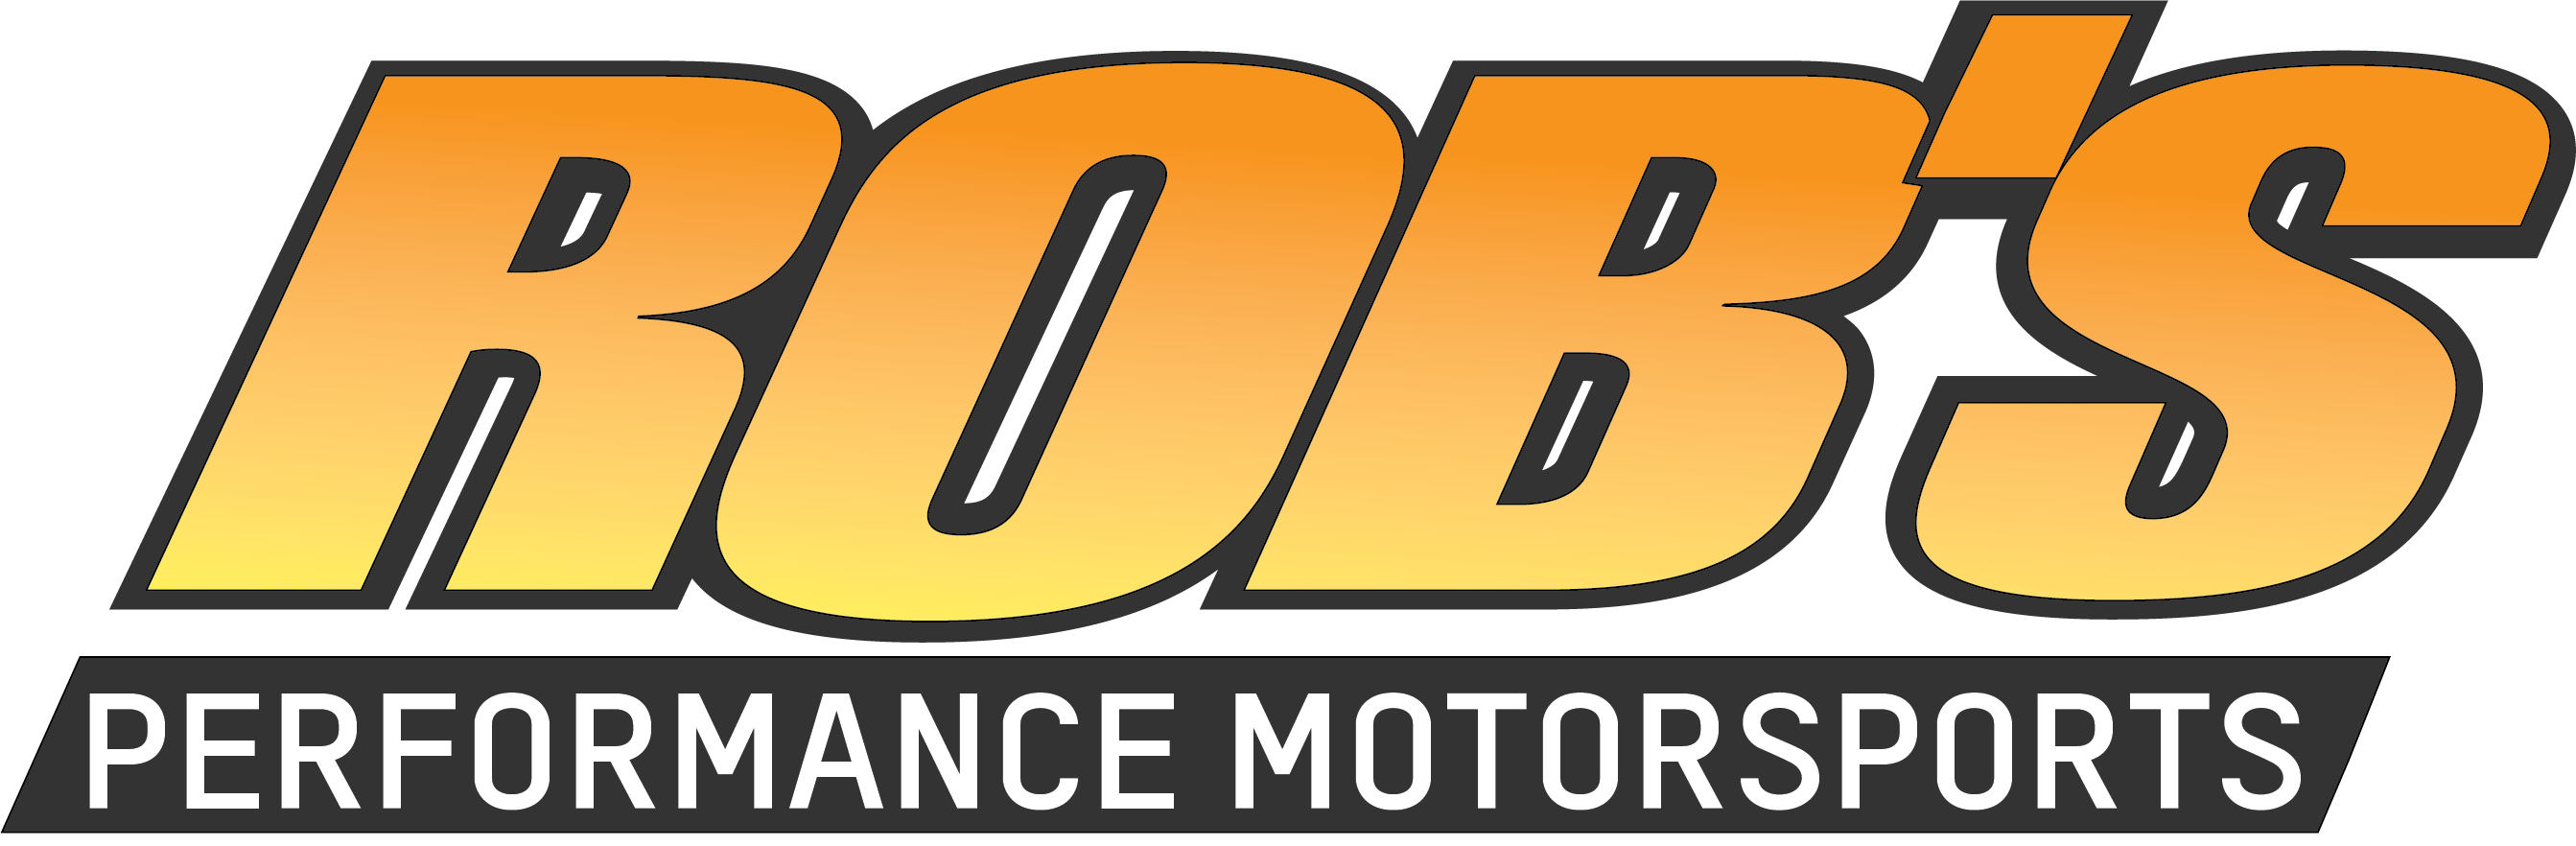 Rob's Performance Motorsports proudly serves Johnson Creek, WI and our neighbors in Milwaukee, Madison, Waukesha, Janesville and Rockford